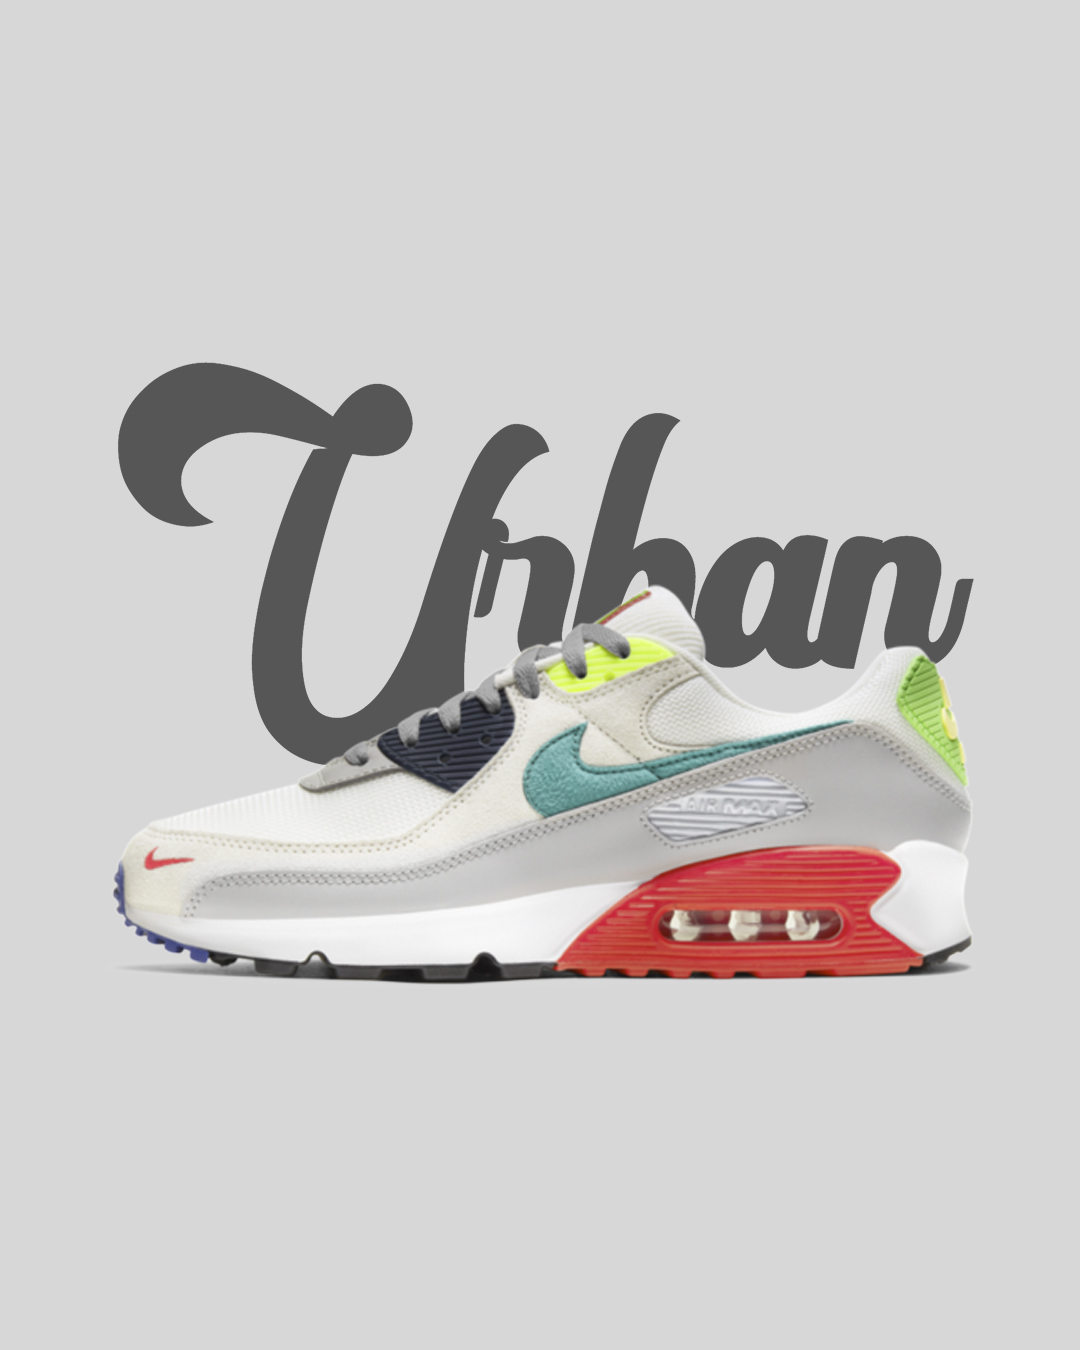 Nike Air Max 90 Evolution of Icons – Urban Collection